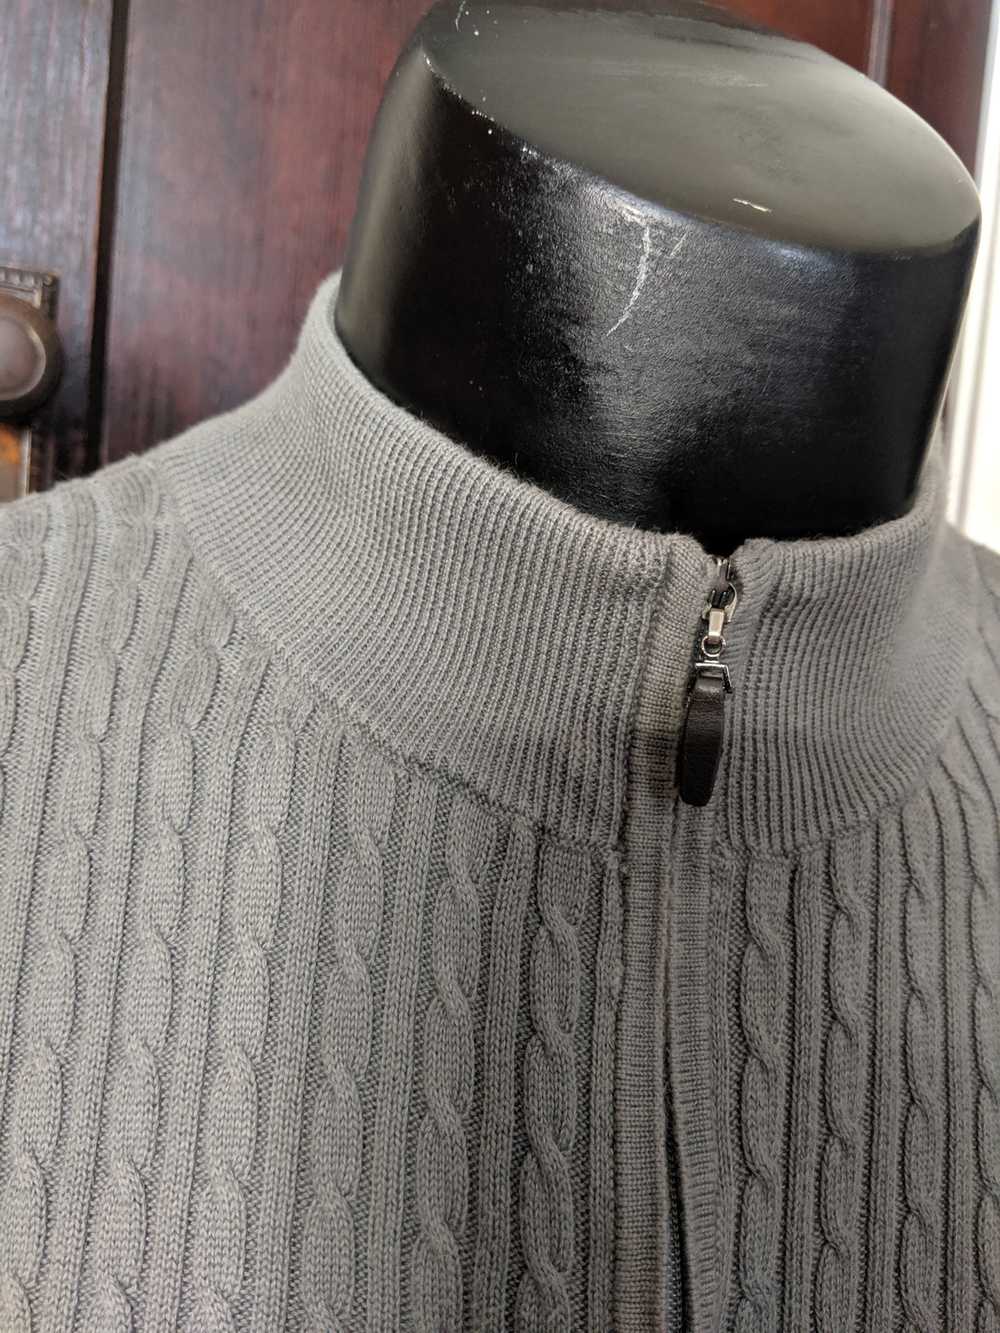 Pendleton Grey 1/4 zip cable knit sweater - image 6